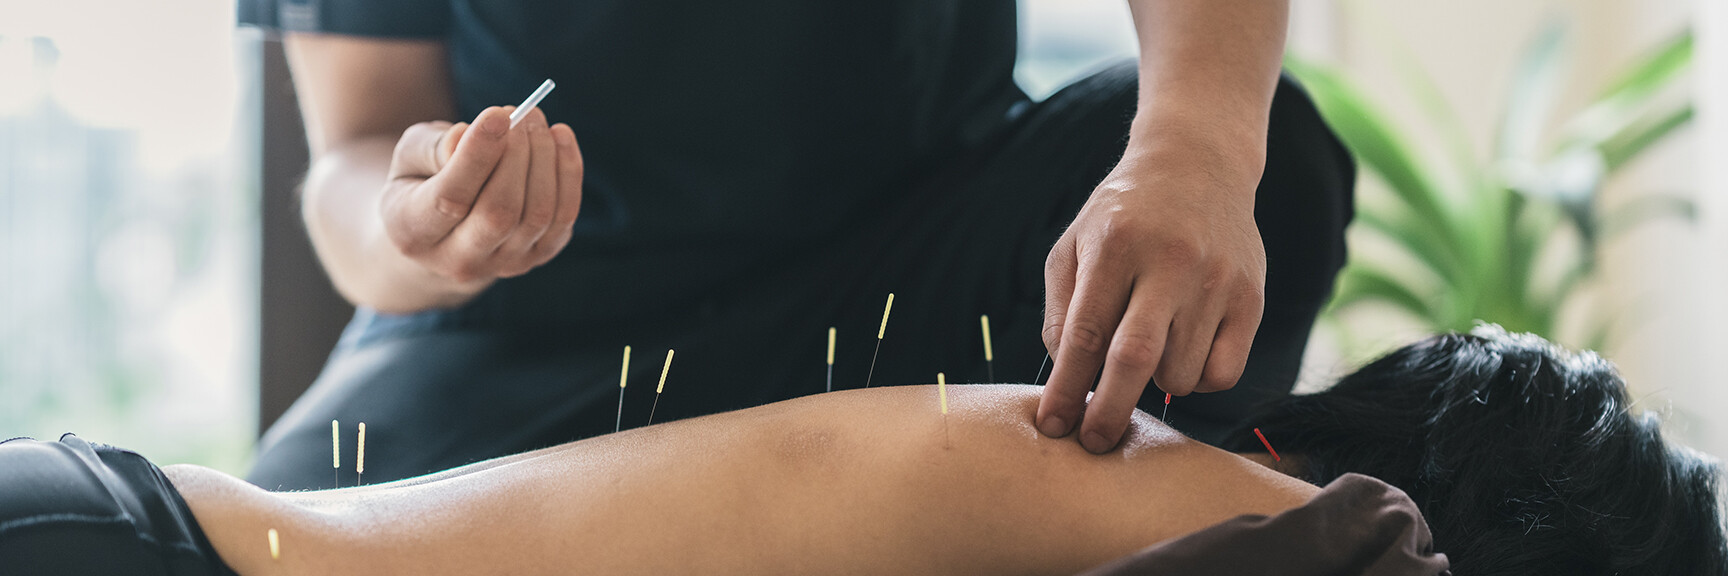 A person receiving acupuncture treatment with needles inserted into their body, lying on a massage table in a peaceful and serene environment.